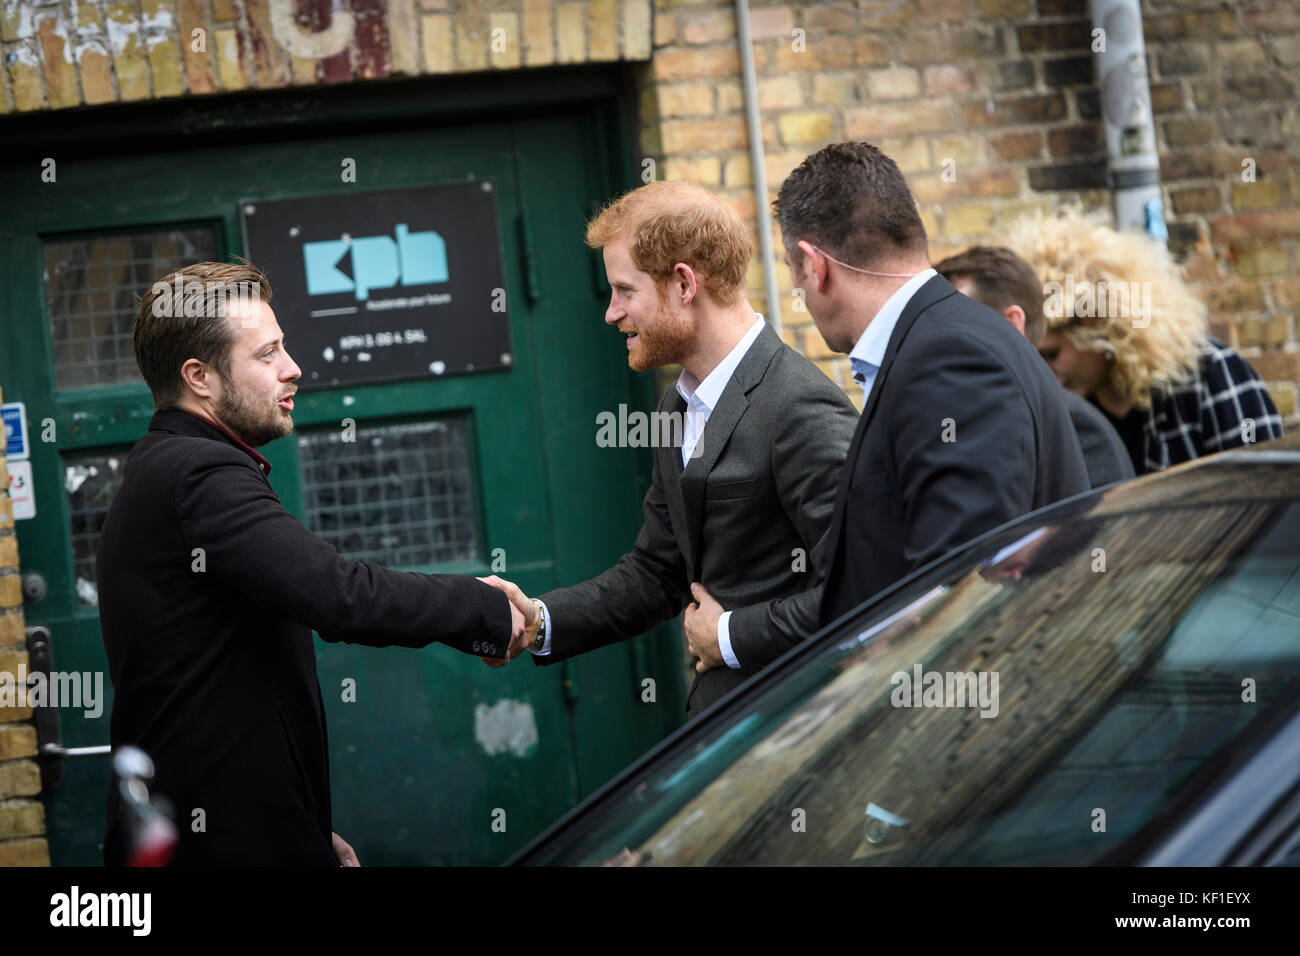 Copenhagen, Denmark. 25th October, 2017.HRH Prince Harry of Wales shakes hands with Olivier Sevestre – community manager of KPH Projects in Copenhagen. Harry paid a visit to the centre during a two-day official trip to the Danish capital. Credit: Matthew James Harrison / Alamy Live News Stock Photo